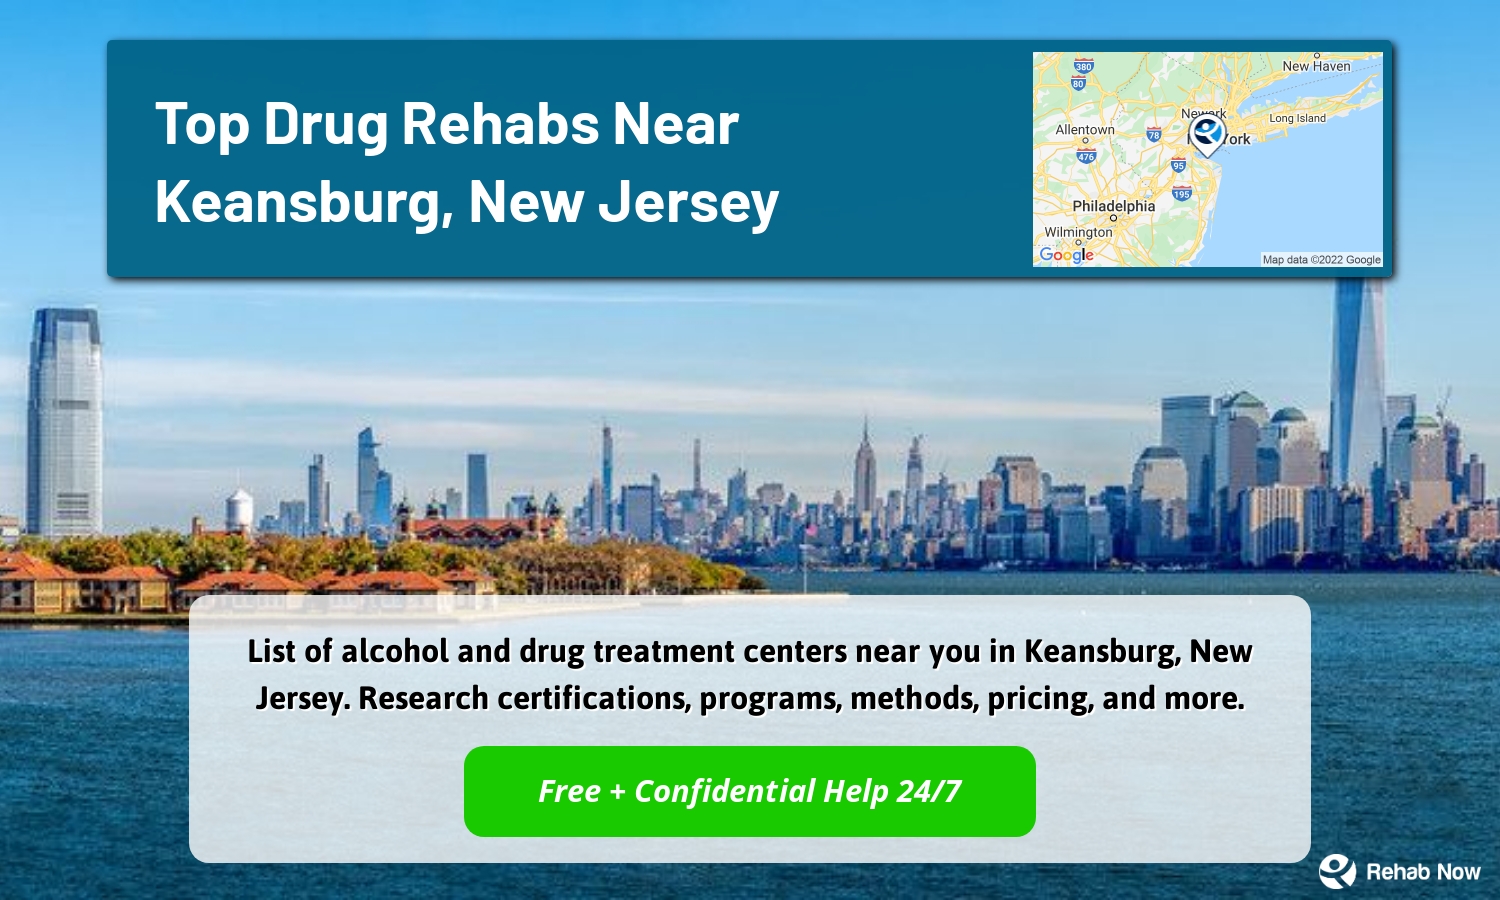 List of alcohol and drug treatment centers near you in Keansburg, New Jersey. Research certifications, programs, methods, pricing, and more.